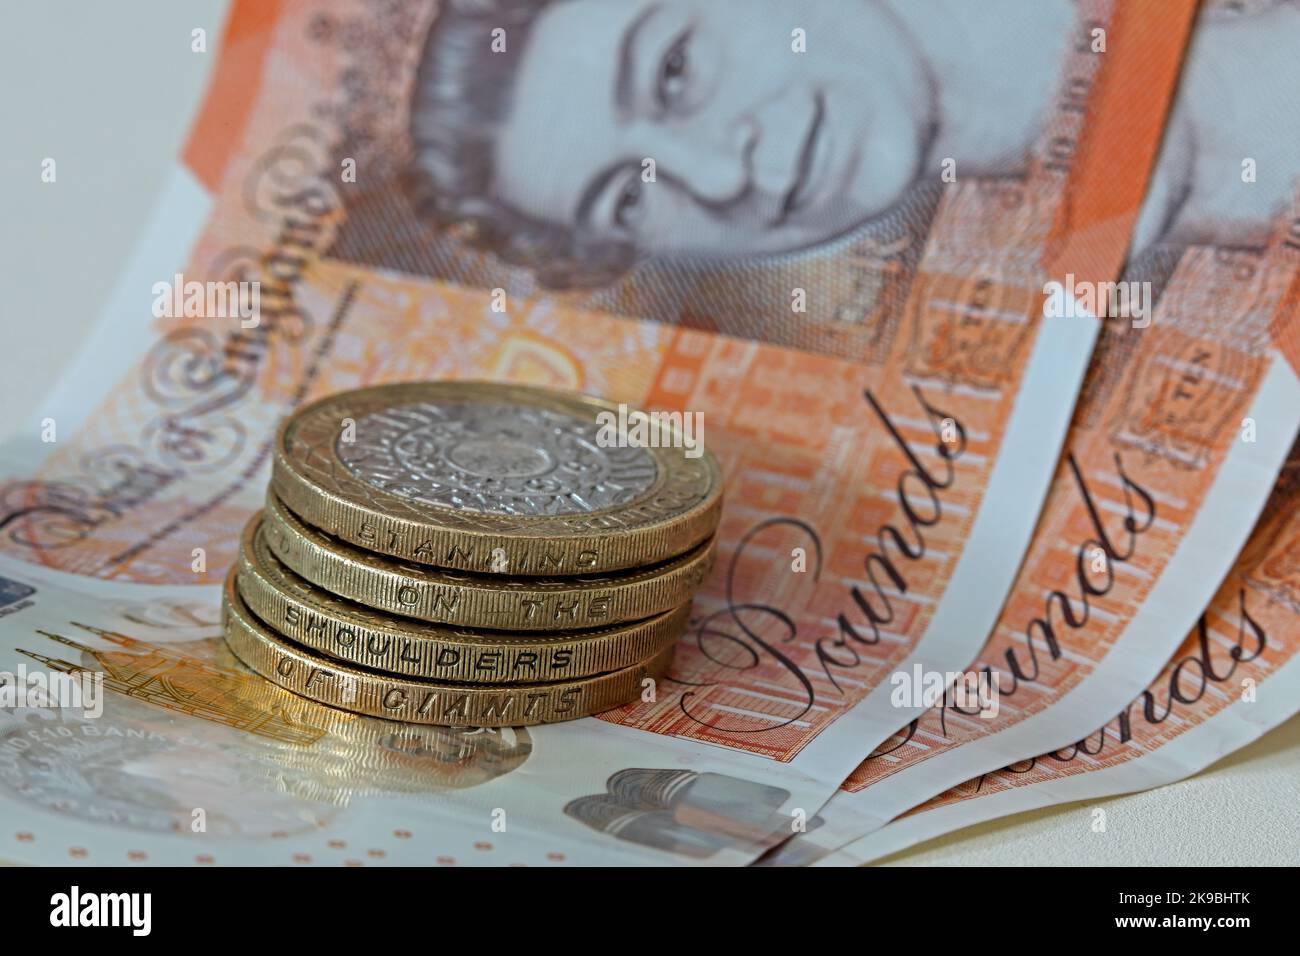 Bank of England, Sterling bank notes, with two pound coins showing inscription, 'Standing on the shoulders of giants'. Coins & note hard currency cash Stock Photo